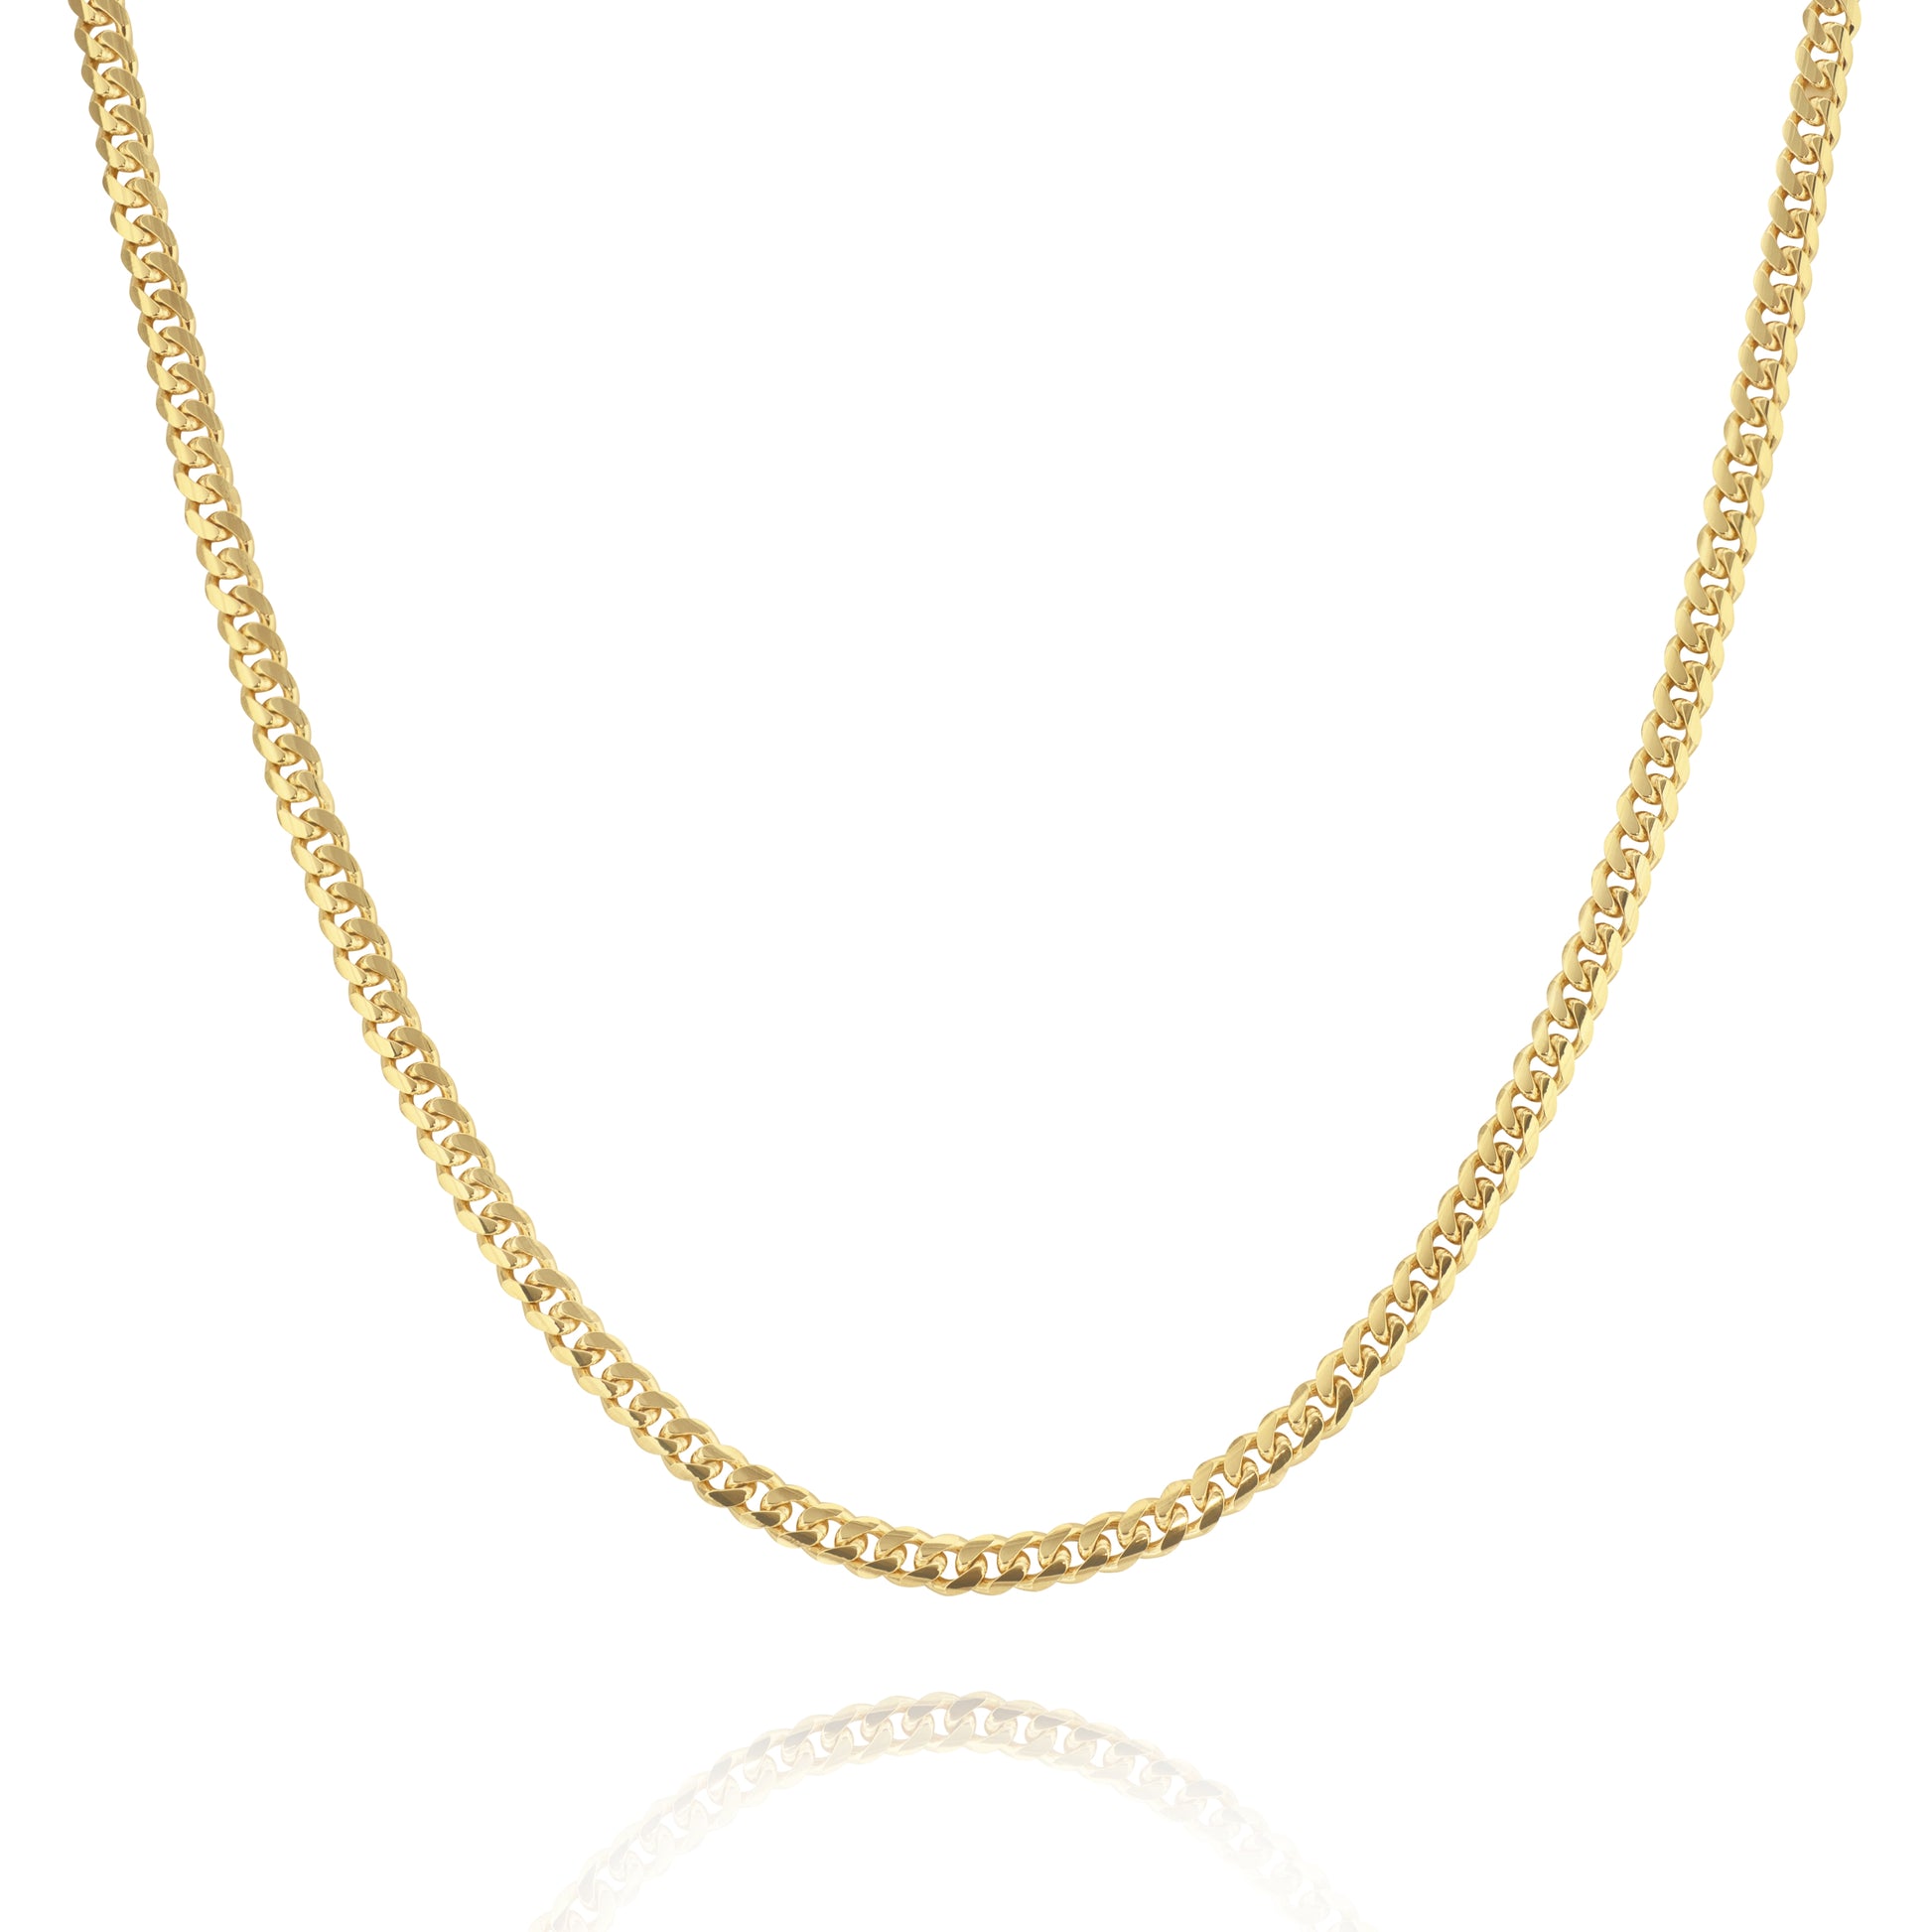 10K Yellow Gold Triple Clasp Cuban Link Chain 5Mm 18In 21.5Dwt / 33.4 G